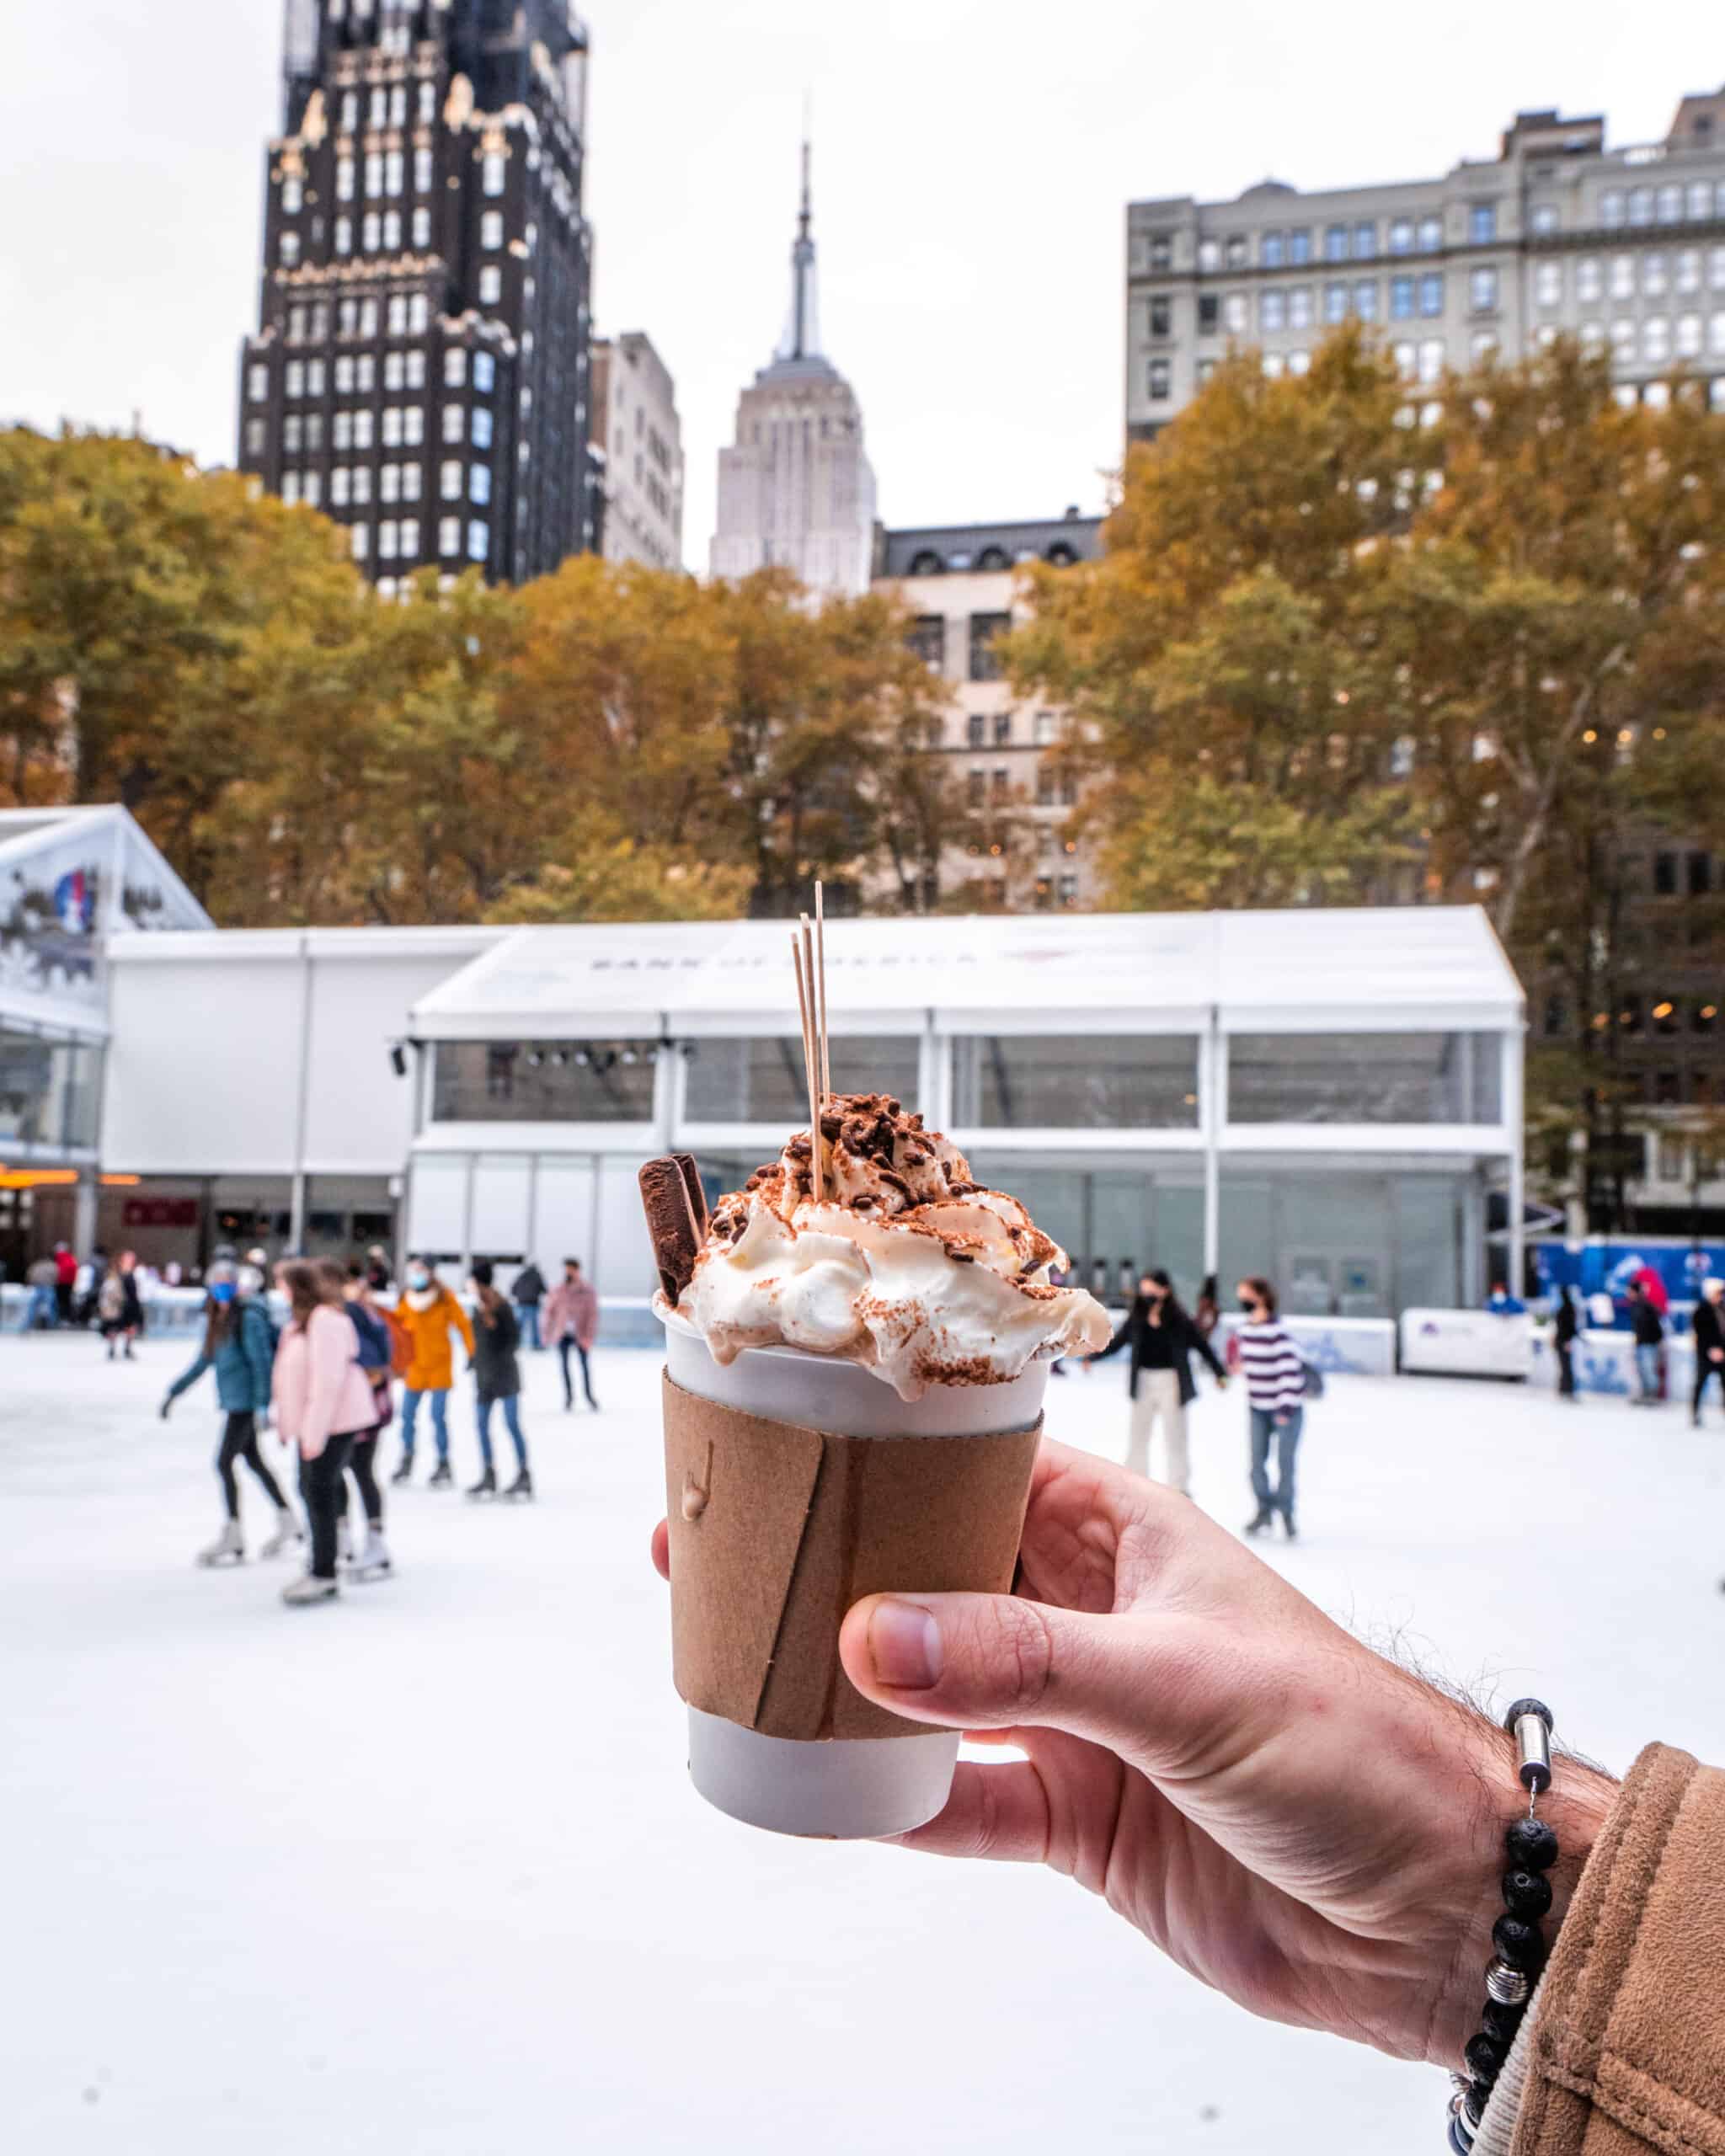 A Foodie’s Guide to Bryant Park Winter Village in NYC – 2021